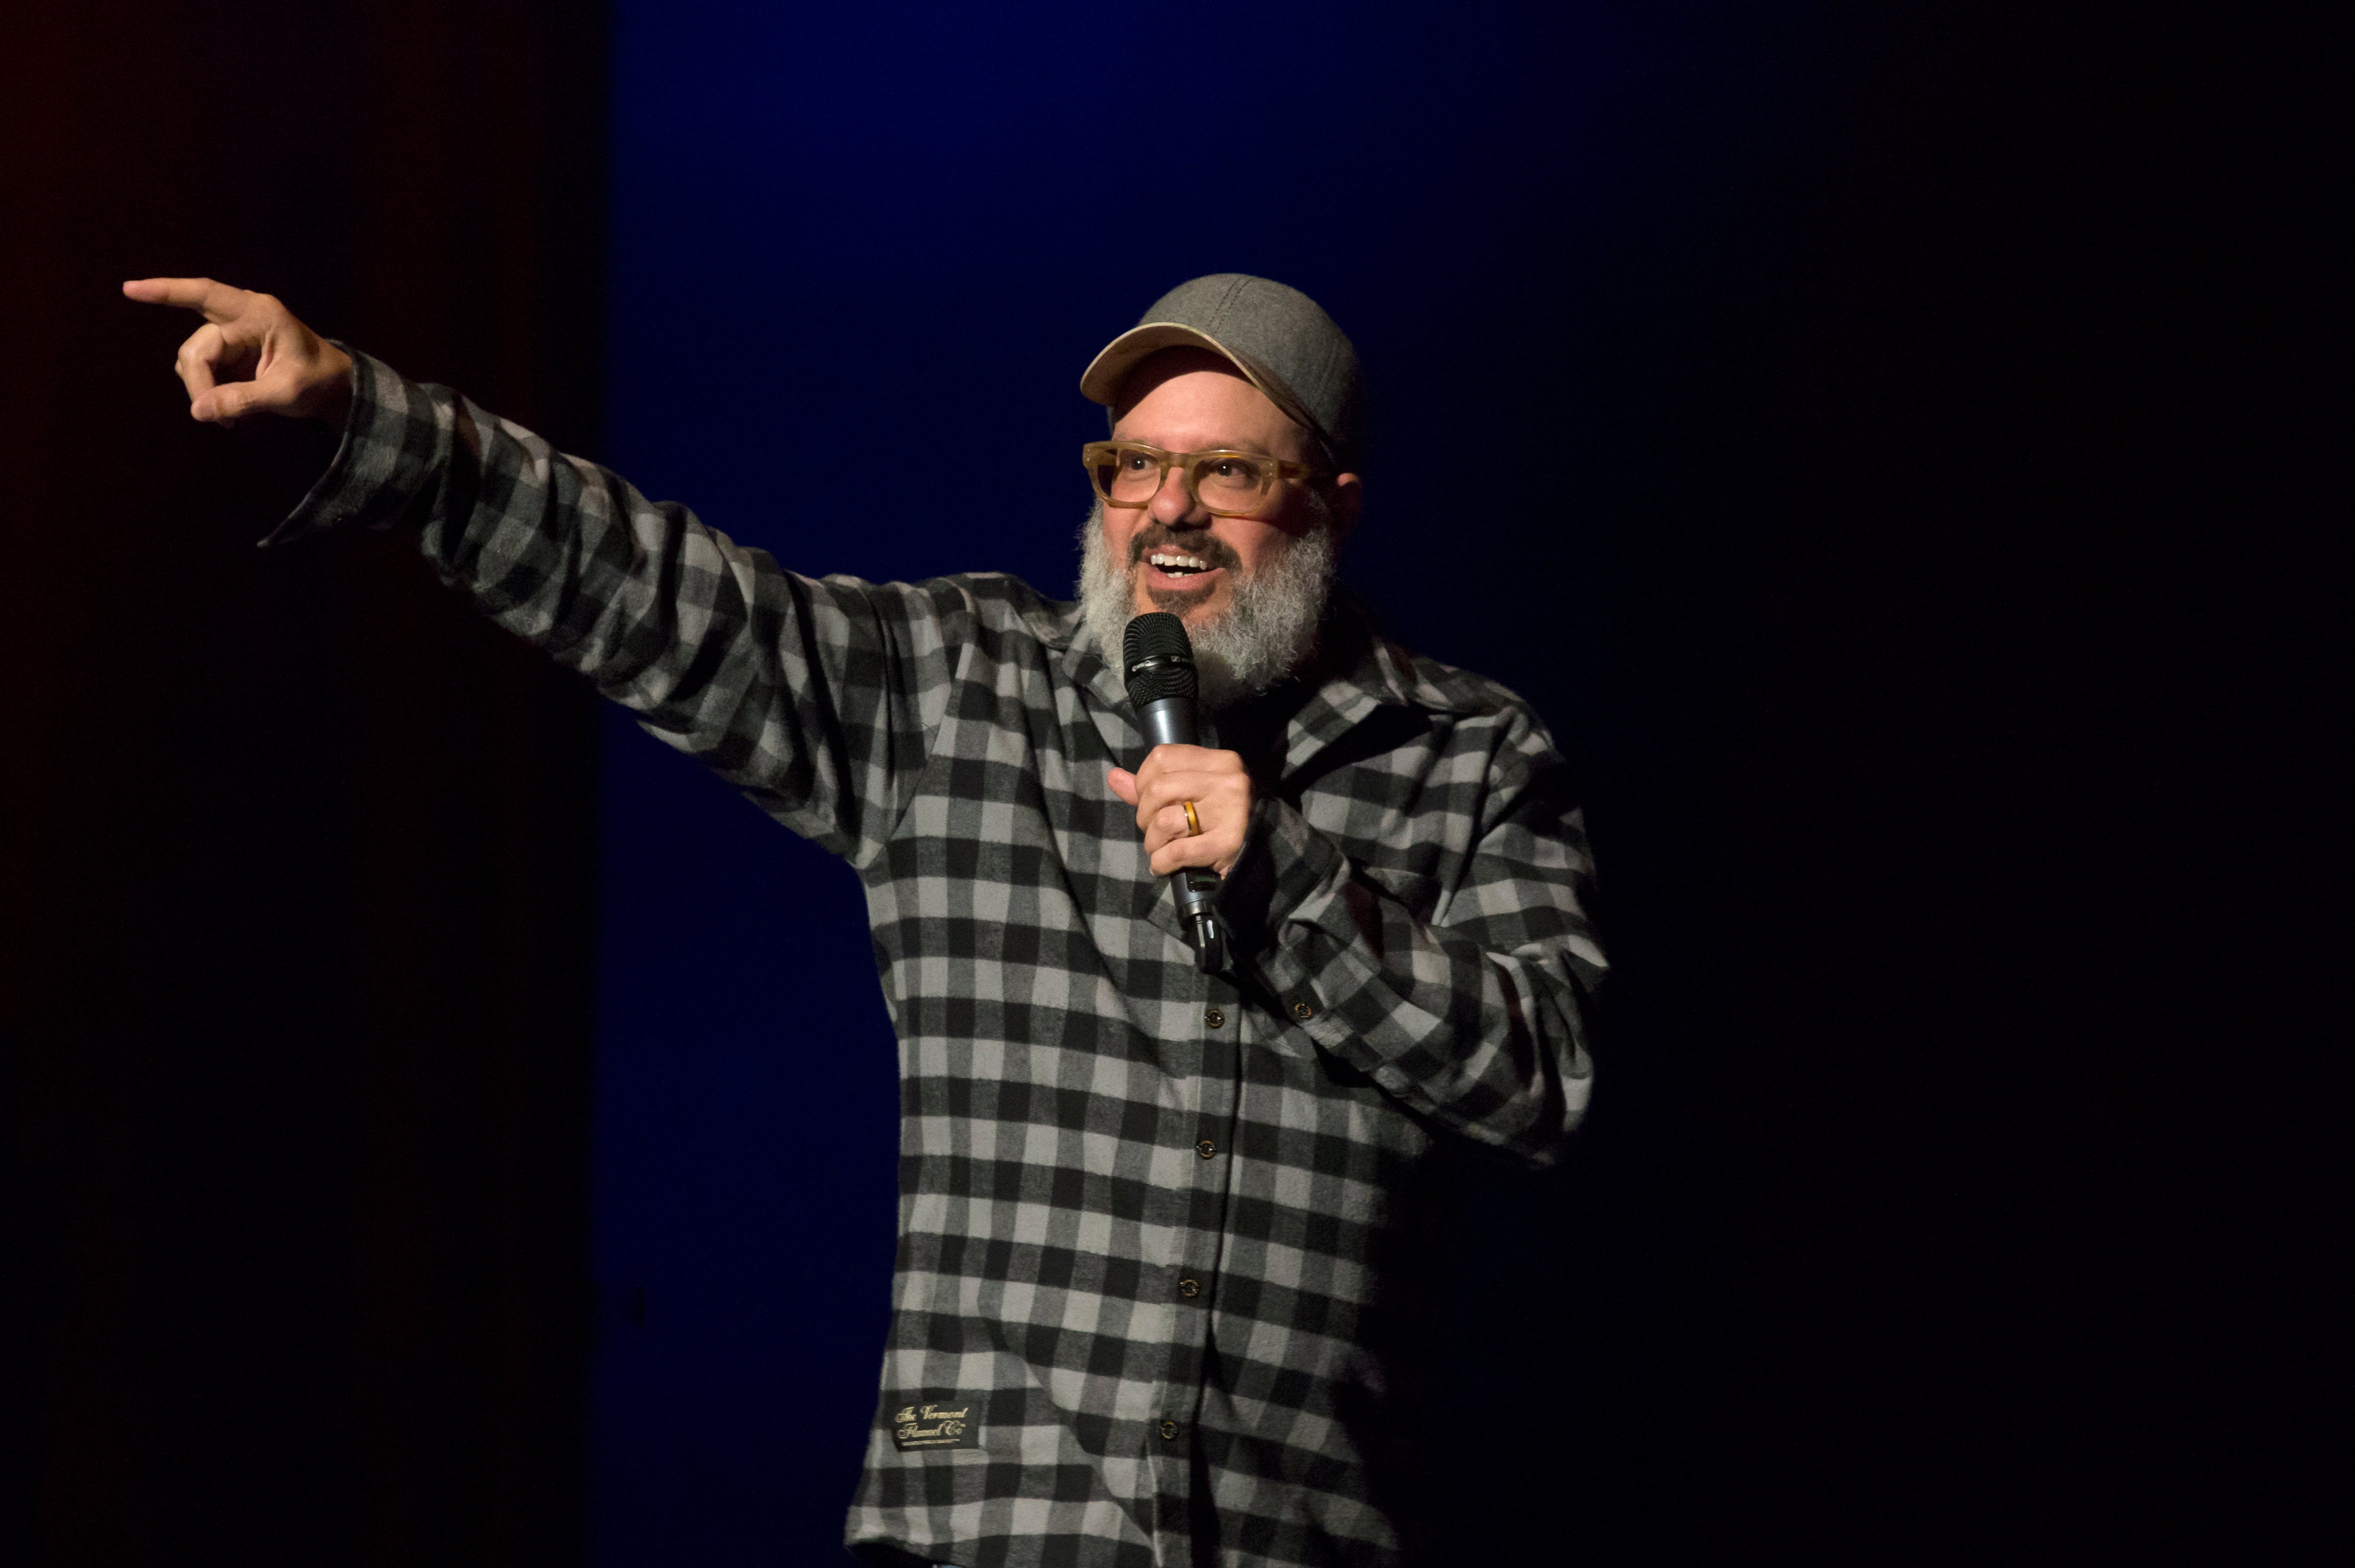 Cross performing stand-up for his 2016 special ‘Making America Great Again'